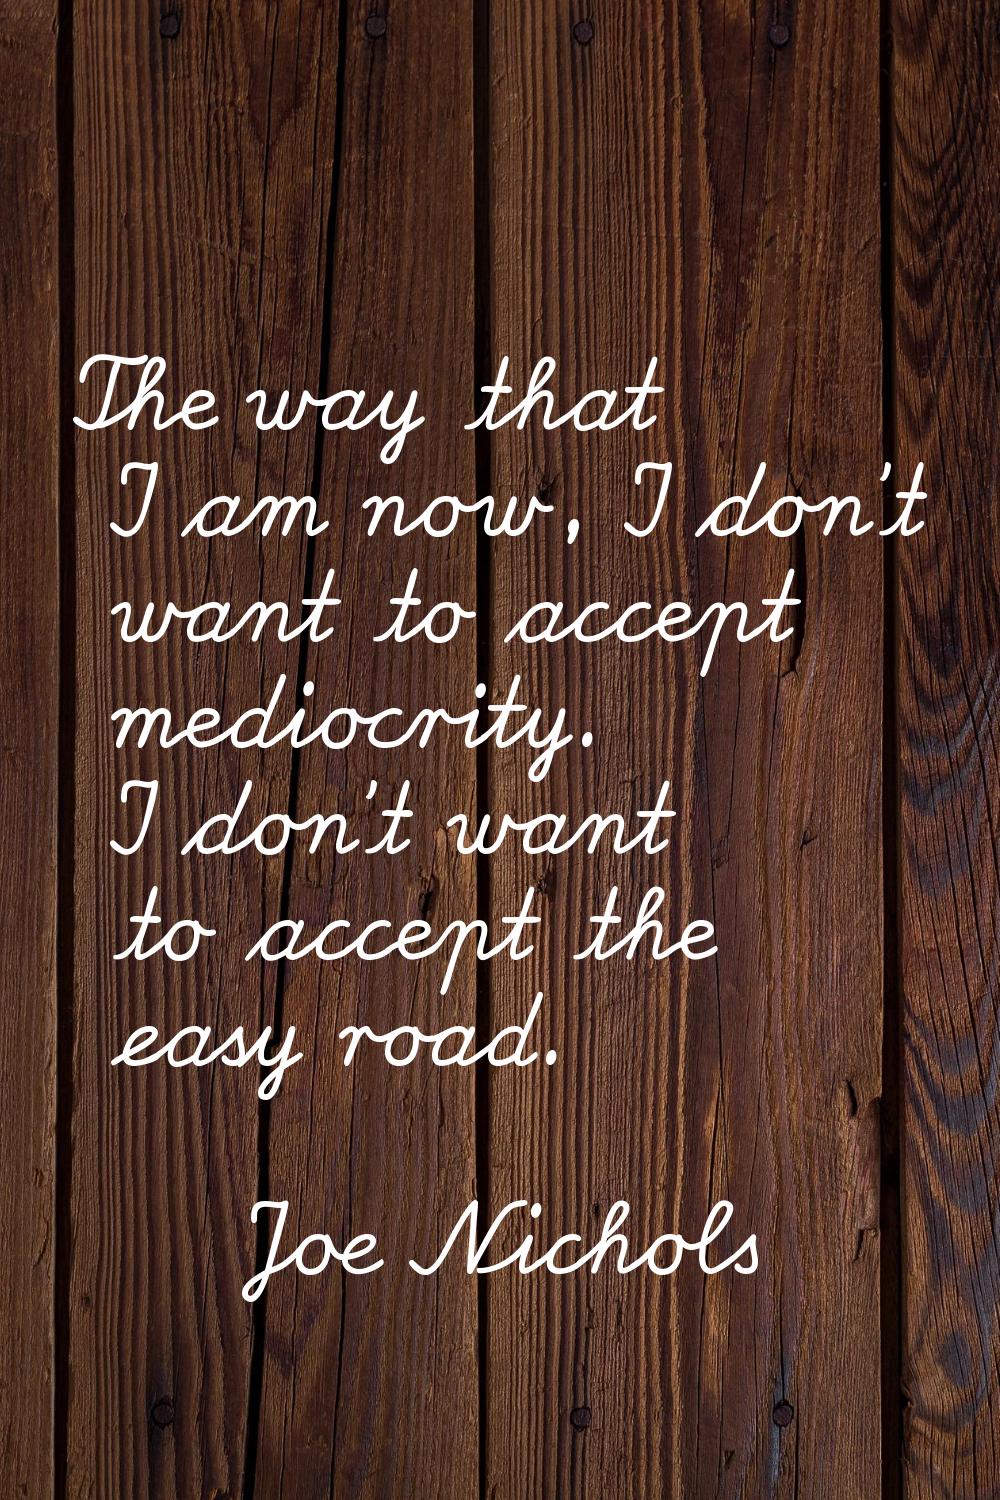 The way that I am now, I don't want to accept mediocrity. I don't want to accept the easy road.